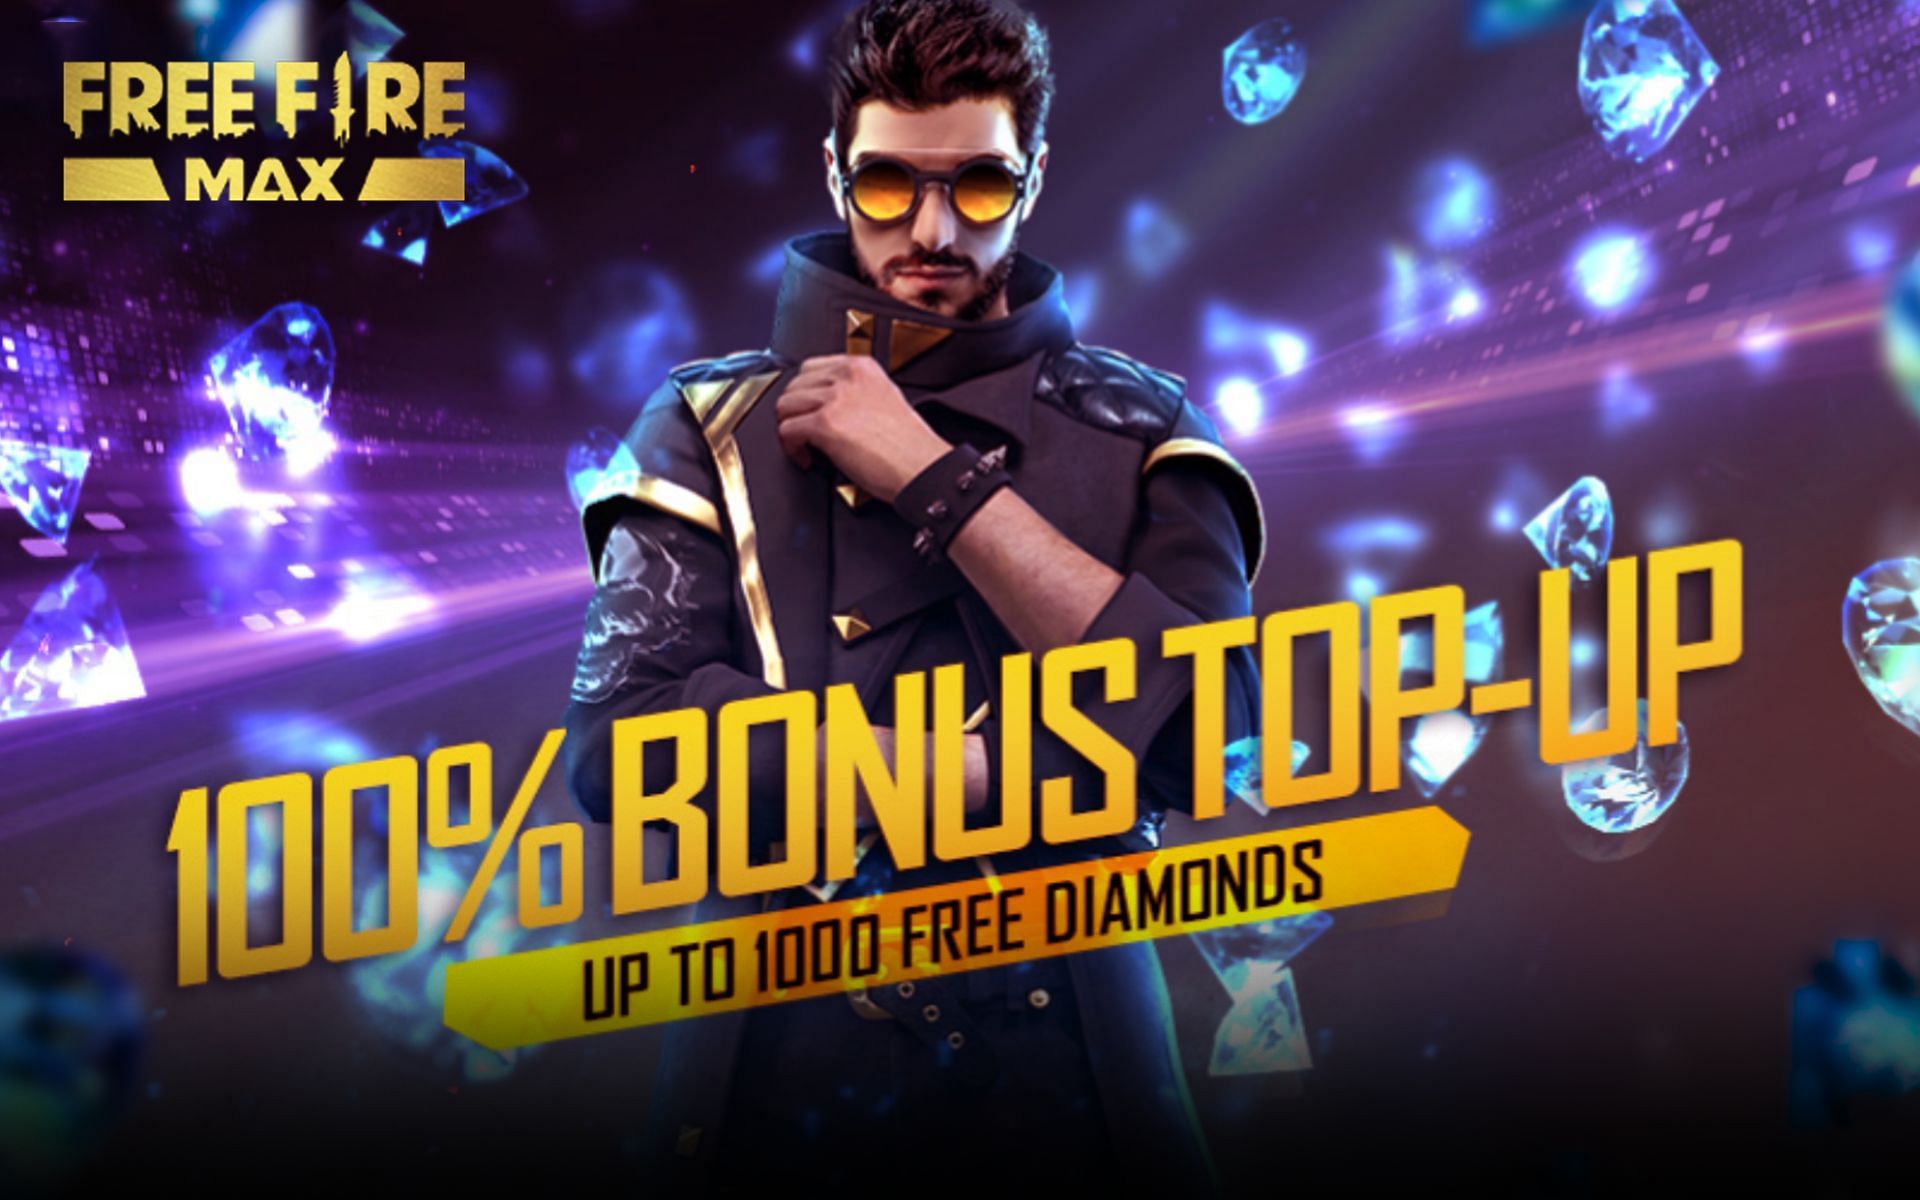 The 100% Bonus Top-Up is available in Free Fire MAX (Image via Sportskeeda)